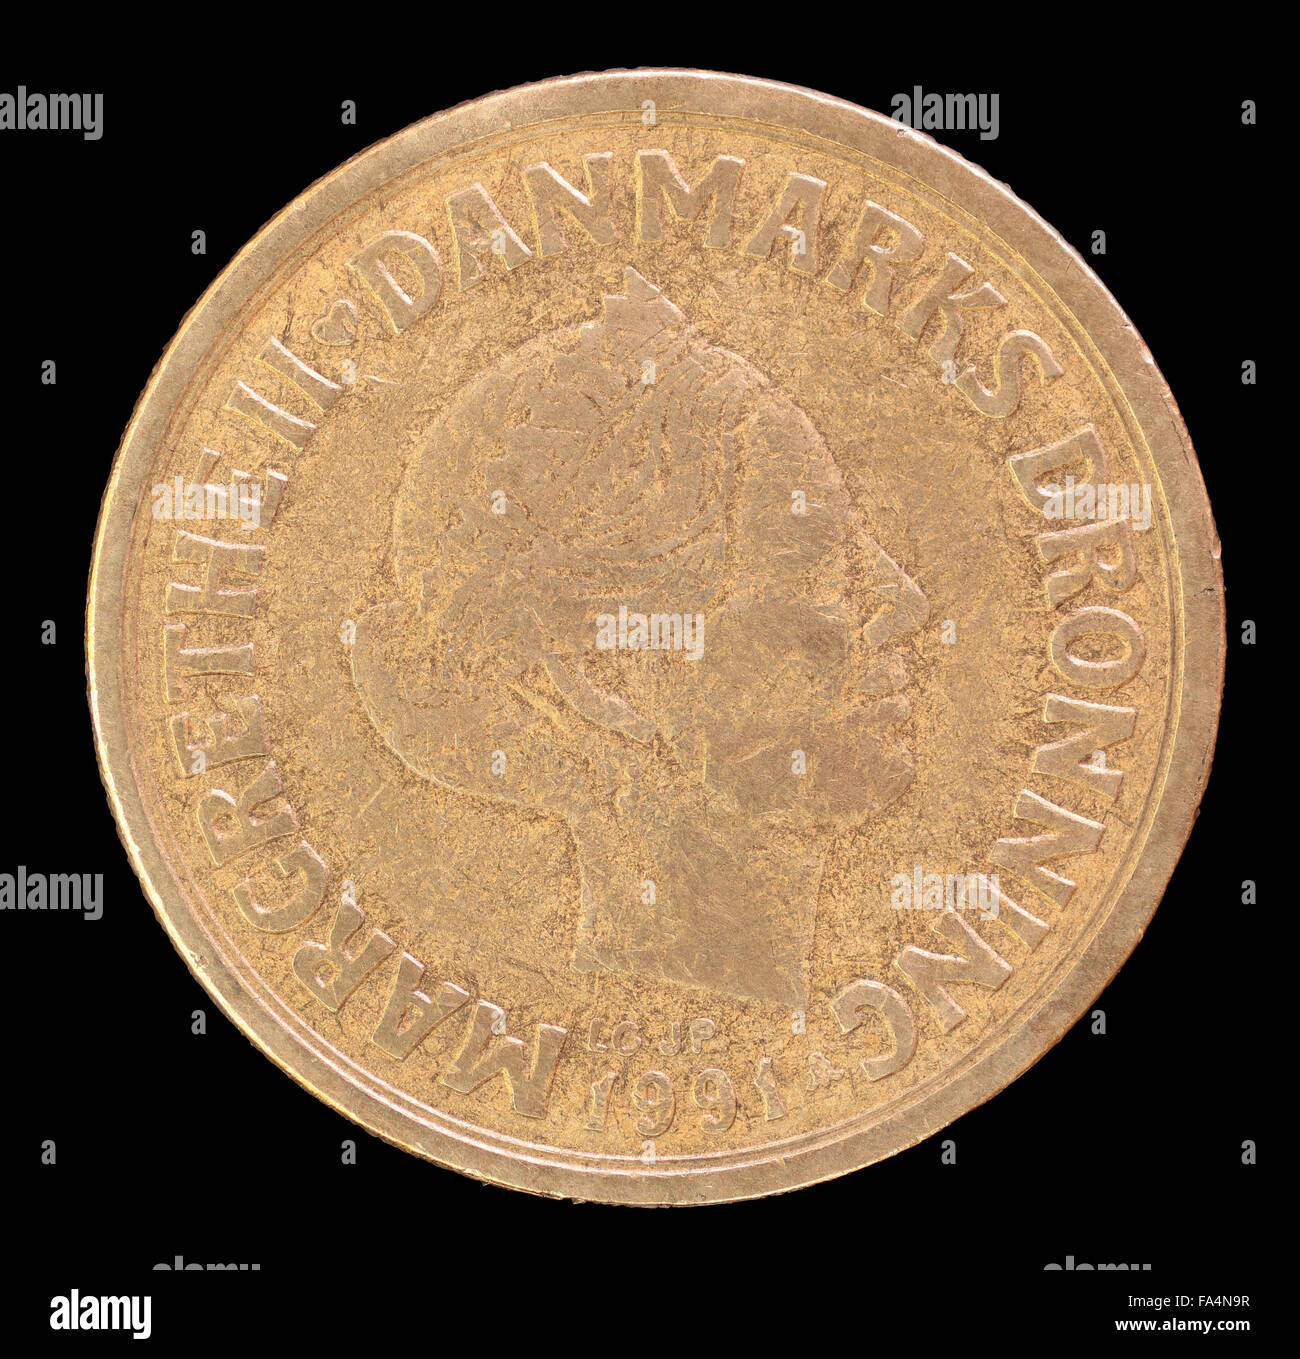 The head face of 20 krone coin, issued by Denmark in 1991, depicting a portrait of Queen Margrethe II. Image isolated on black b Stock Photo